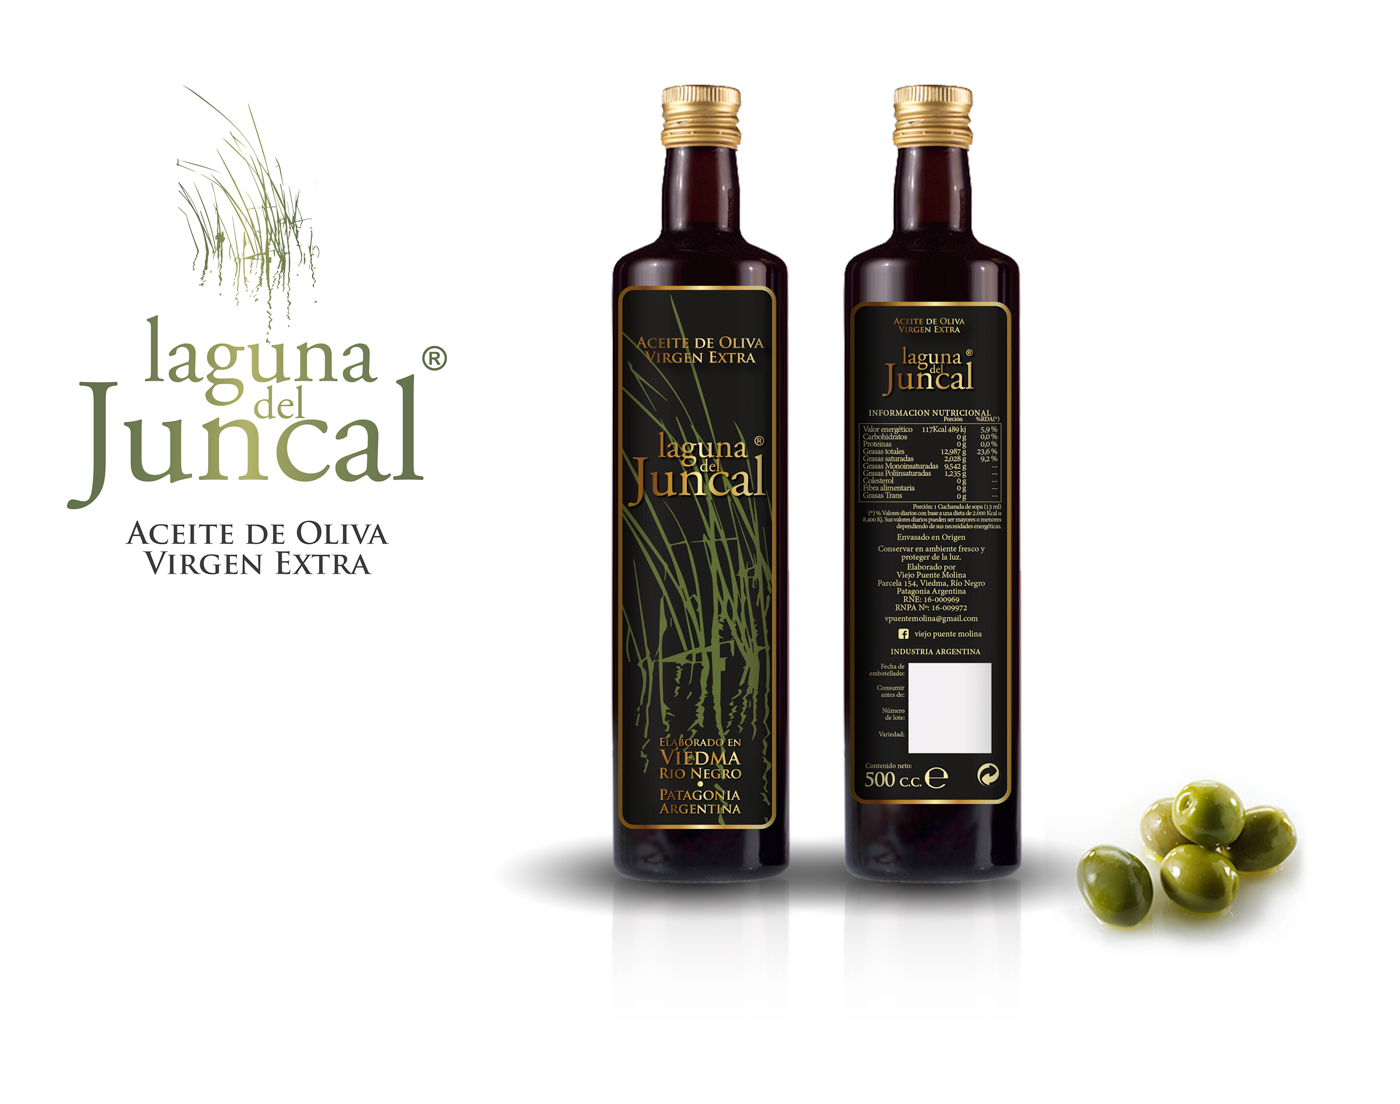 Portfolio of graphic and creative design works of extra virgin olive oil label design and packaging for LAGUNA DEL JUNCAL in Argentina